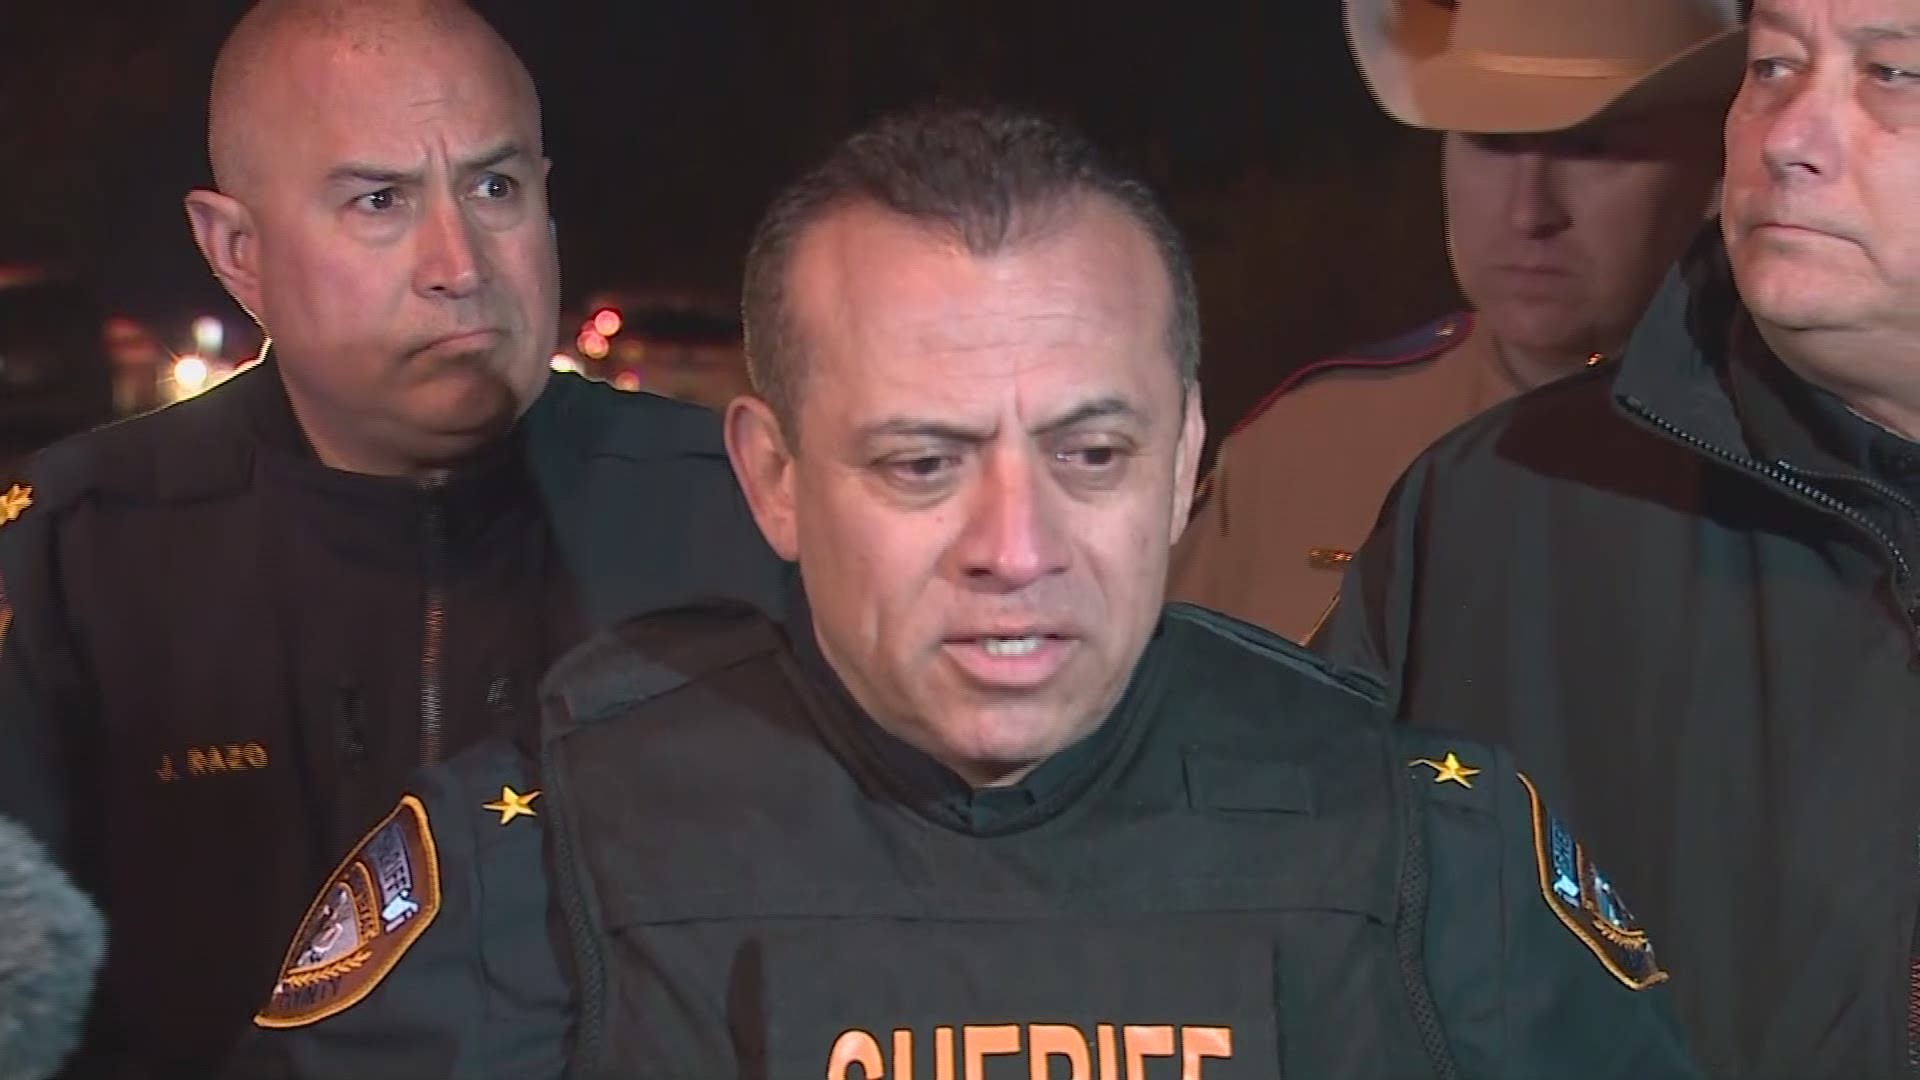 Harris County Sheriff's deputies provide updates on Daniel Trevino, who died of a self-inflicted gunshot wound after an hours-long SWAT standoff in northeast Harris County. Trevino is accused of shooting and wounding 3 officers.